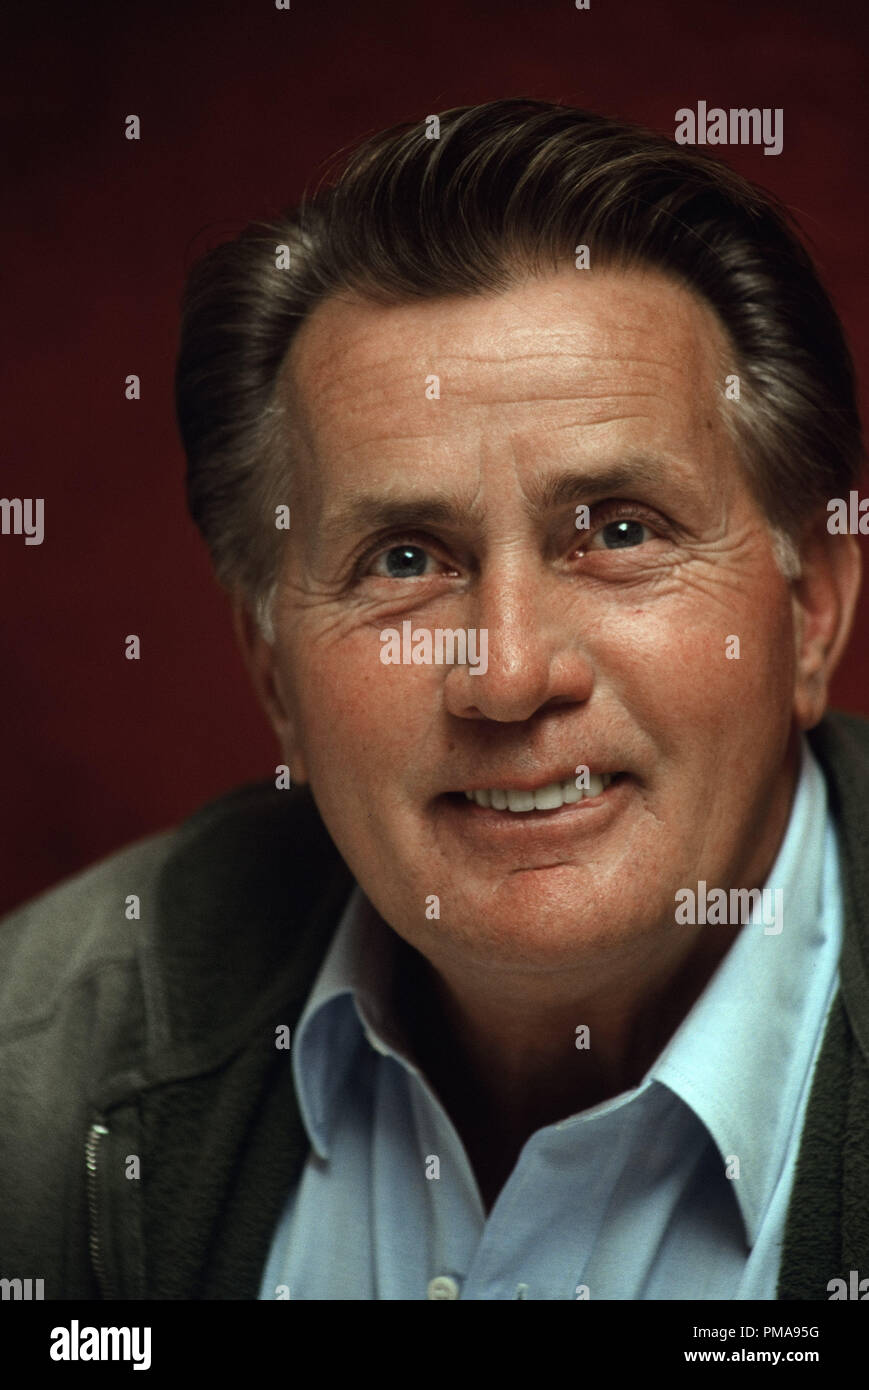 Martin Sheen circa 2001 © JRC /The Hollywood Archive  -  All Rights Reserved  File Reference # 31955 796JRC Stock Photo